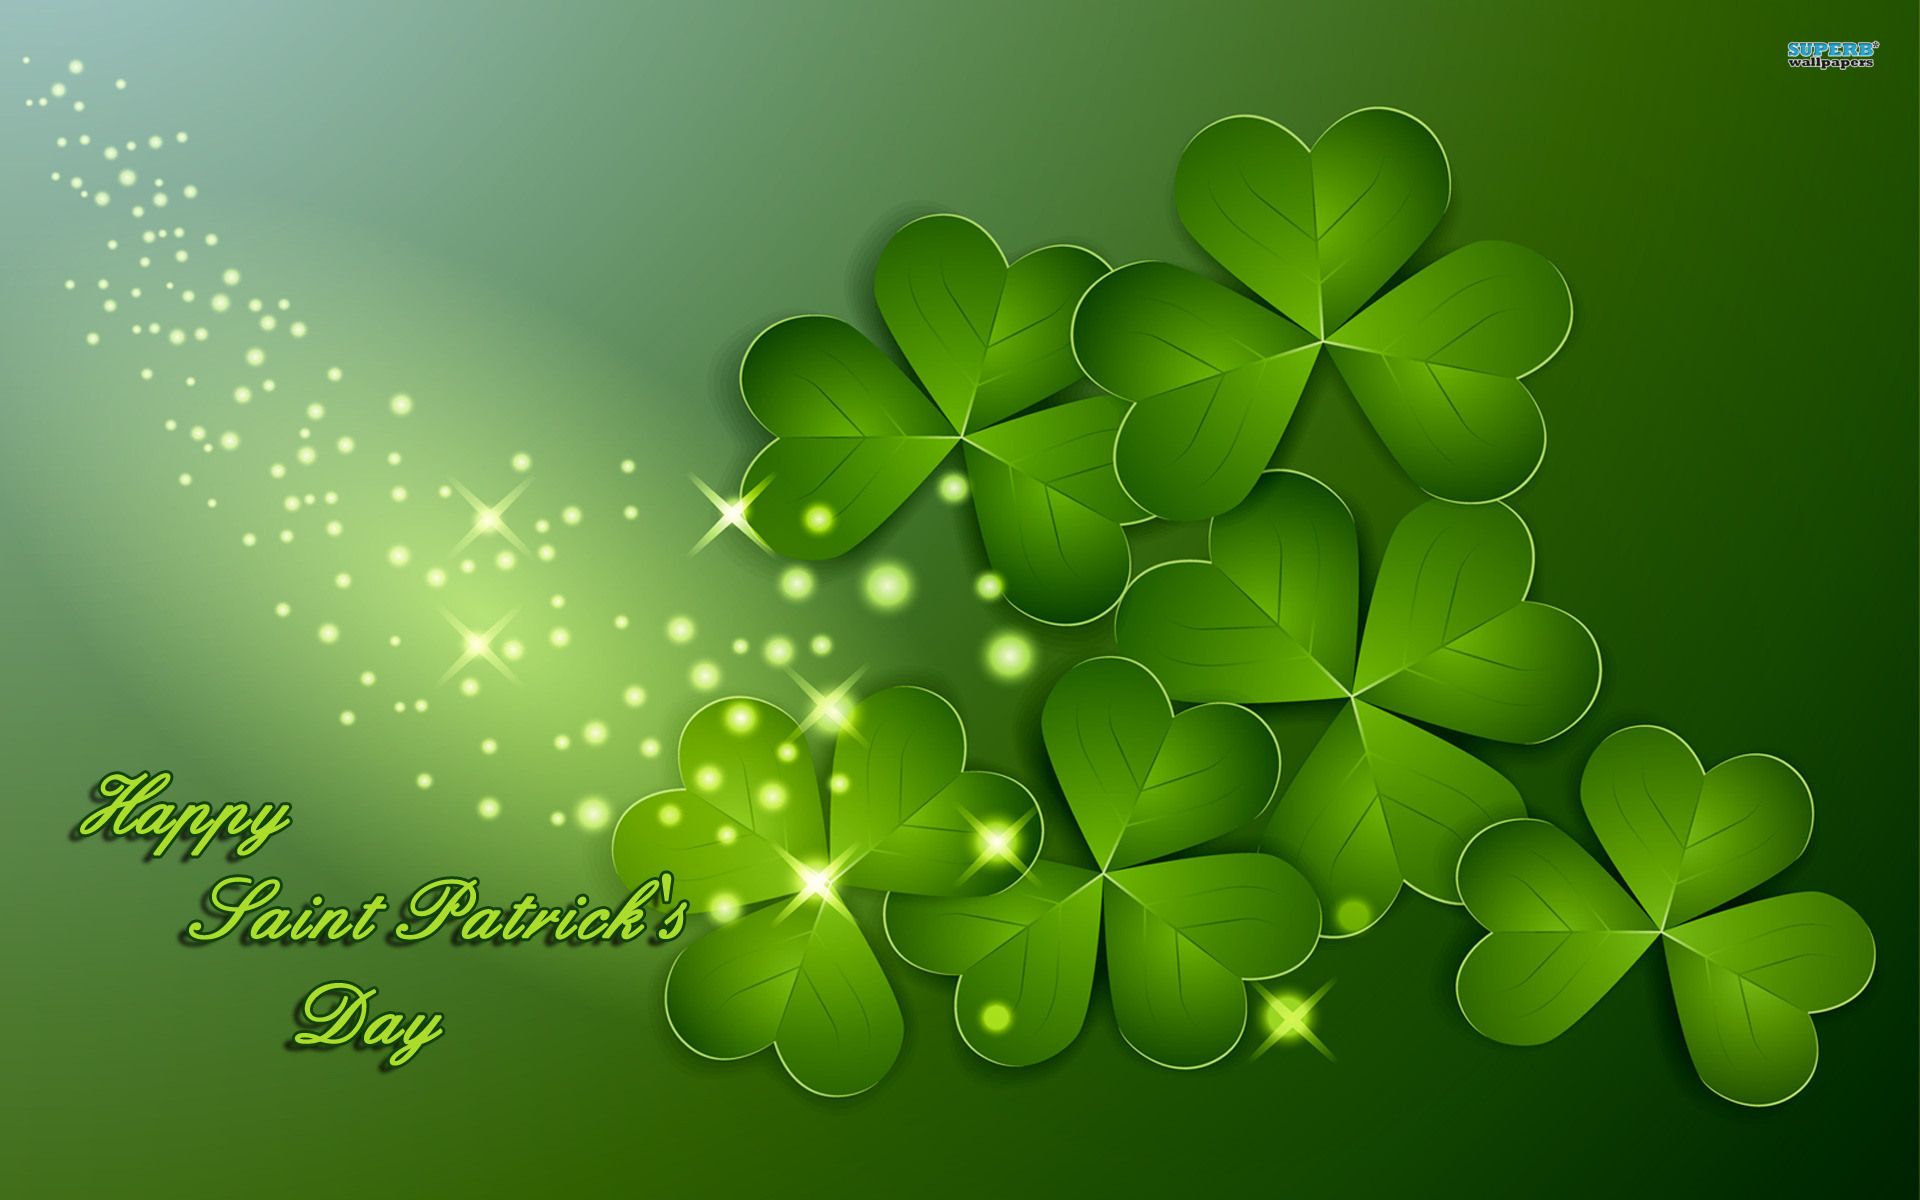 St Patricks Day Green Cartoon Clover Background St Patricks Day Clover  Cartoon Background Image And Wallpaper for Free Download